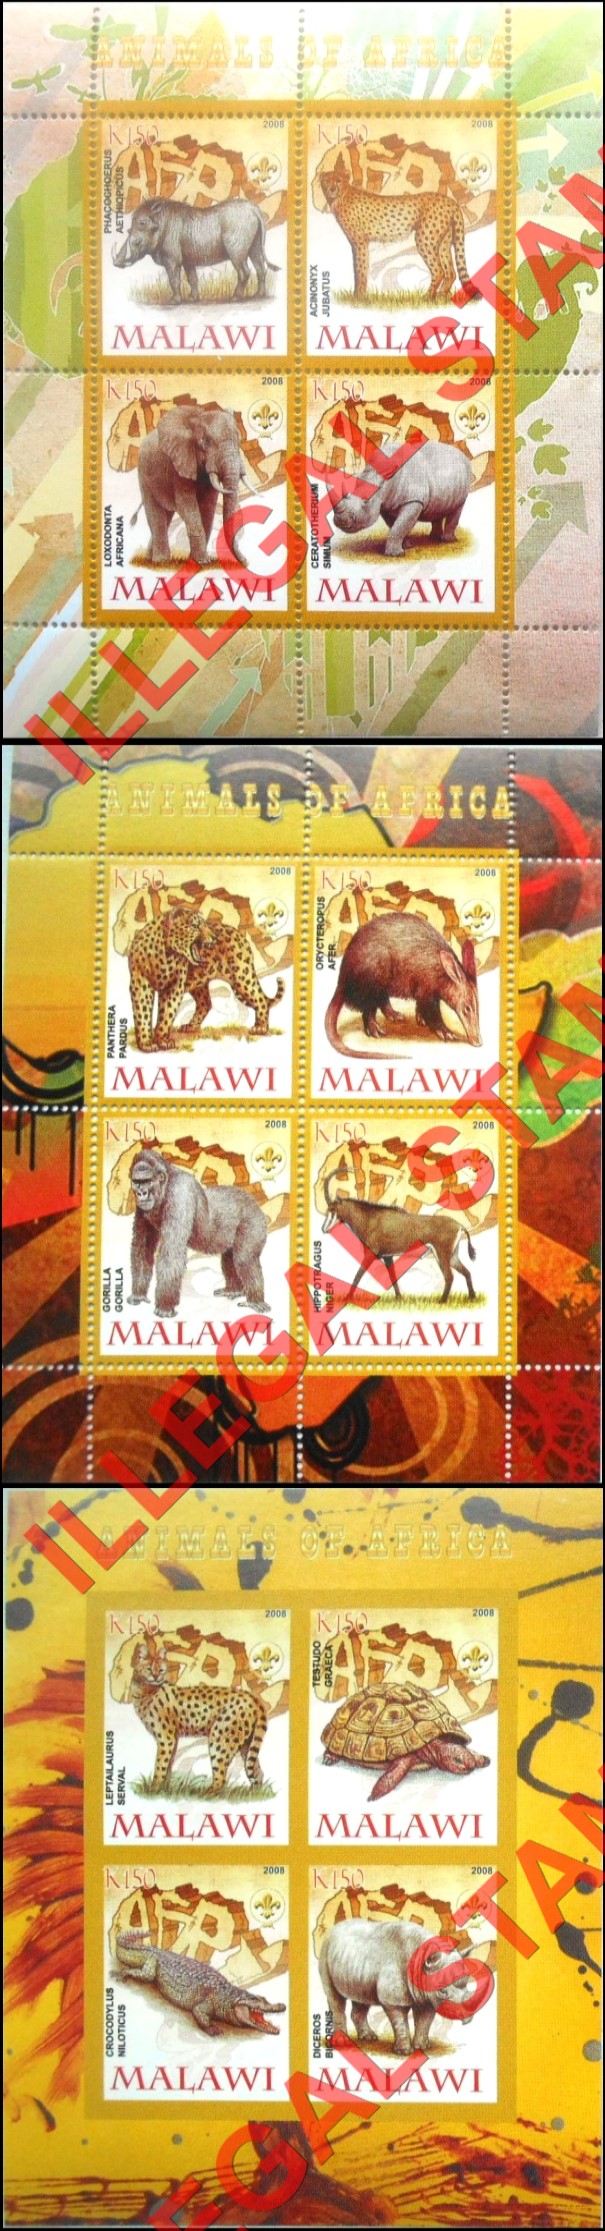 Malawi 2008 Animals of Africa Illegal Stamp Souvenir Sheets of 4